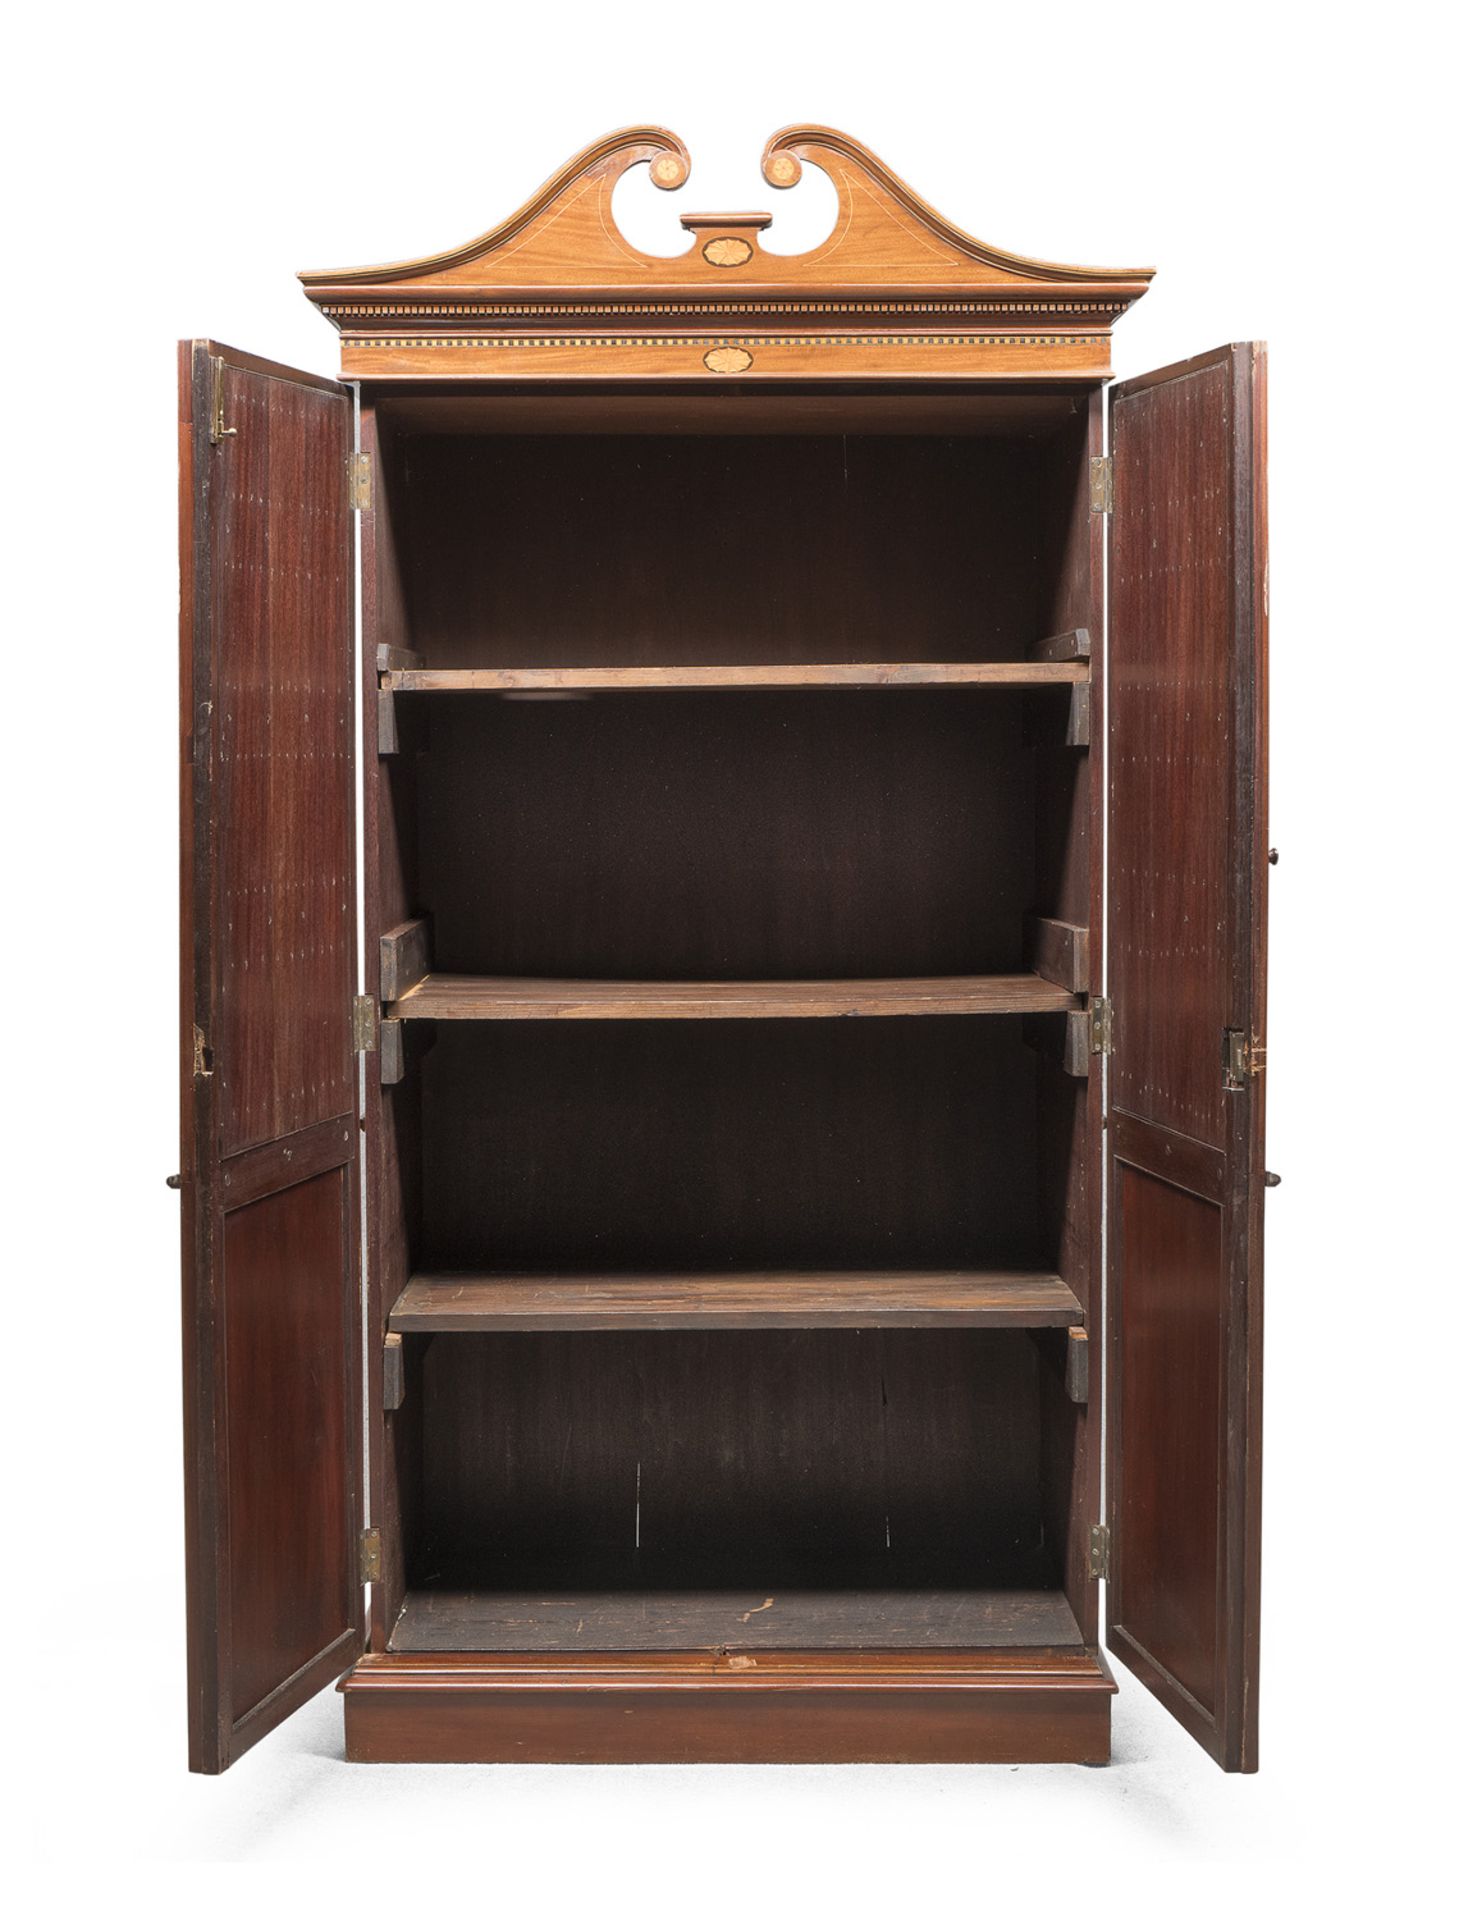 ENGLISH BOOKCASE WITH TWO GLASS DOORS WITH BOOK SPINES LATE 19TH CENTURY - Image 2 of 2